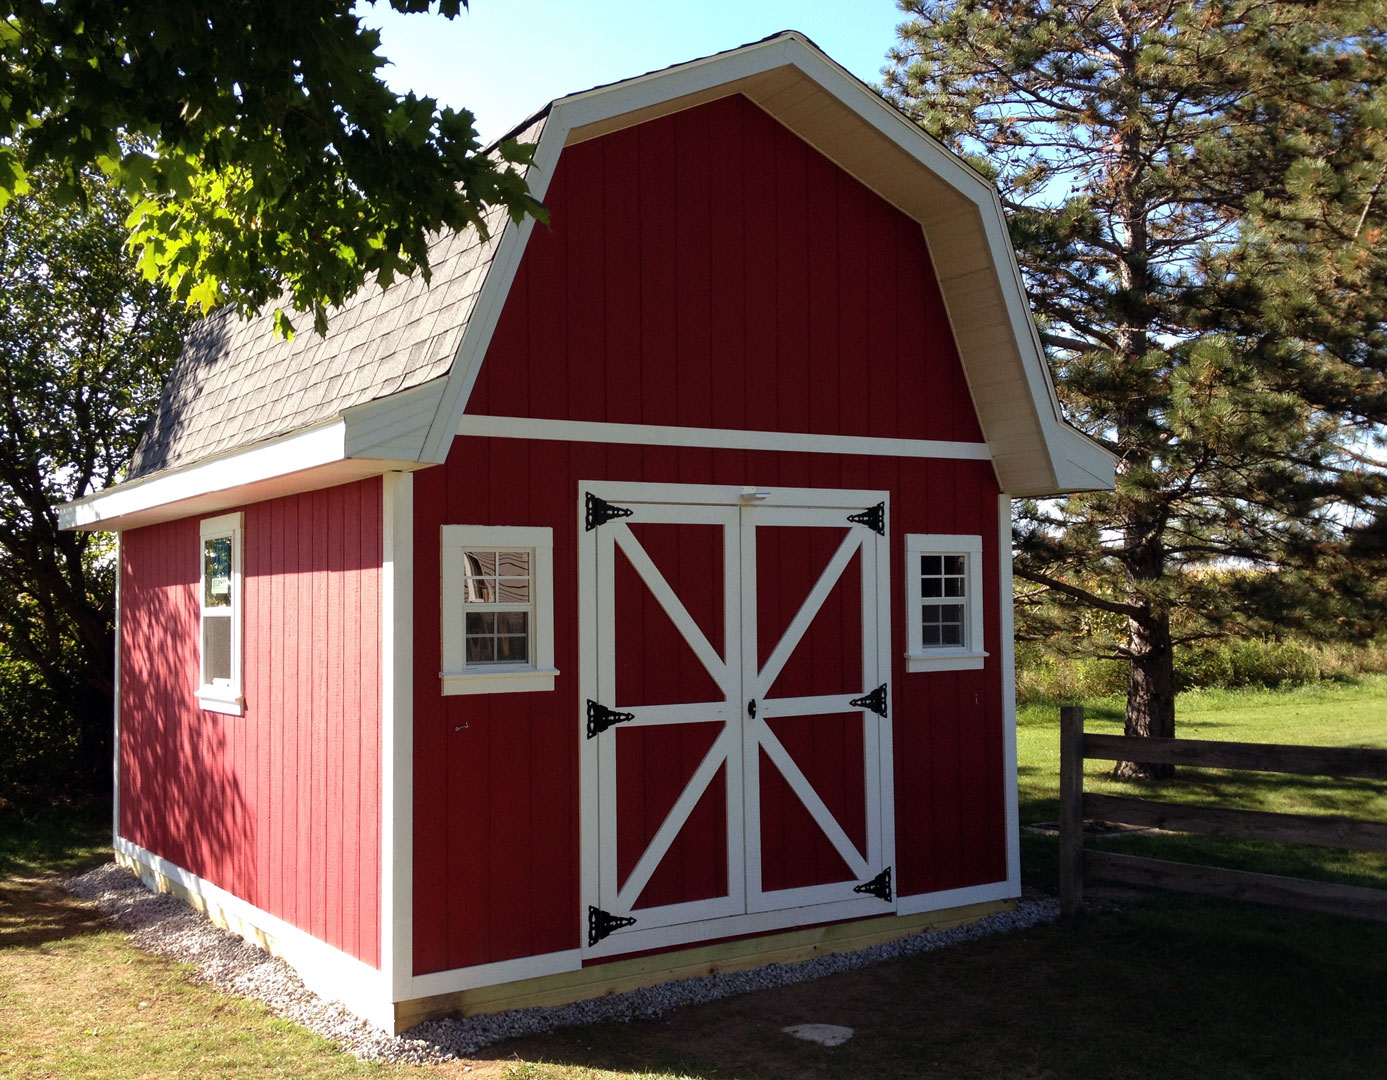 Free Gambrel Roof Storage Shed Plans